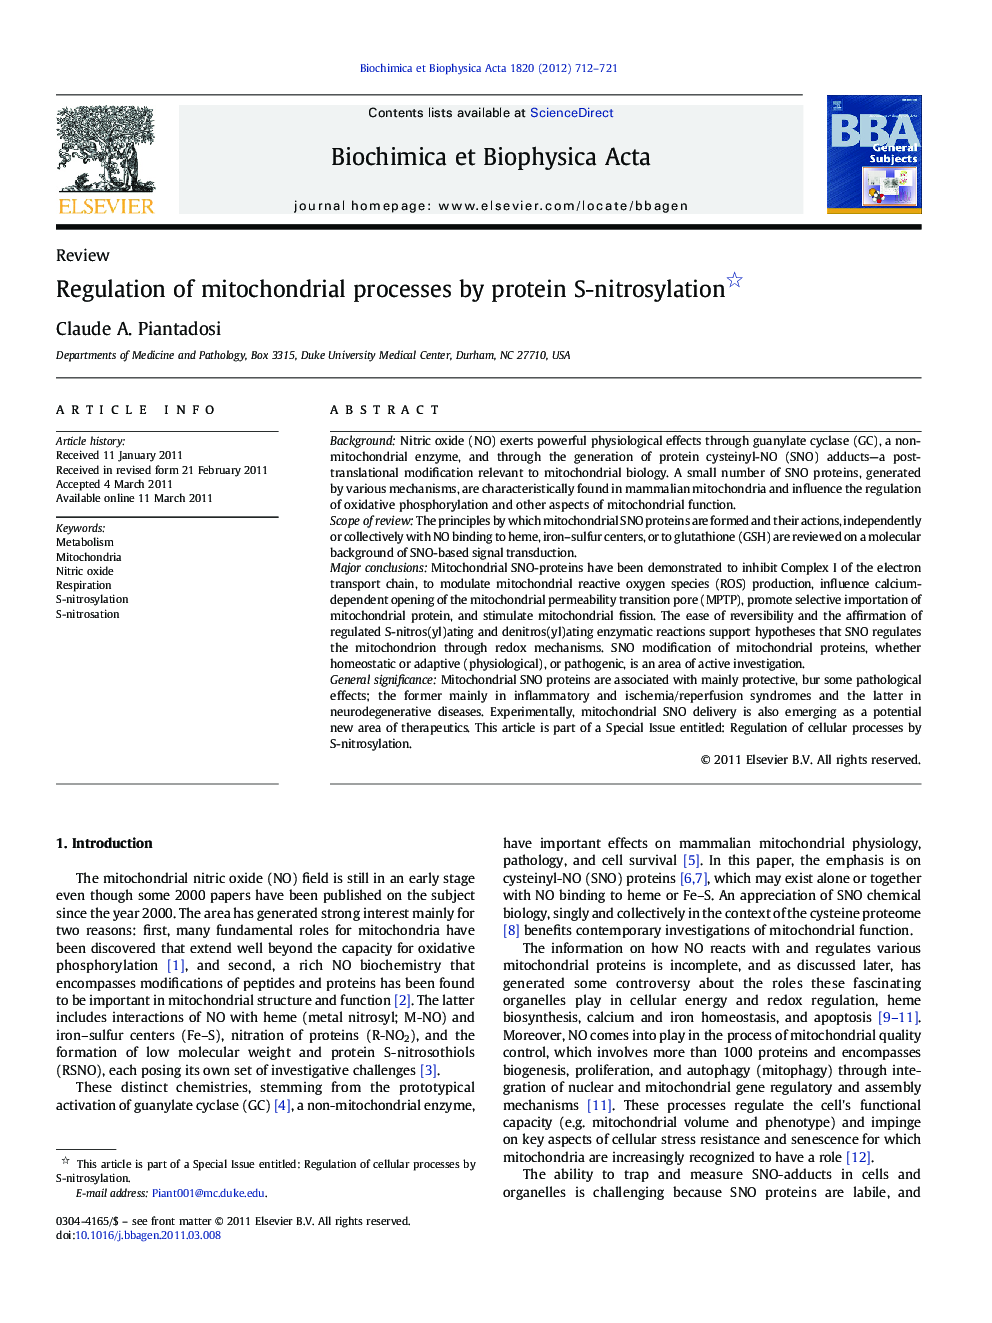 Regulation of mitochondrial processes by protein S-nitrosylation 